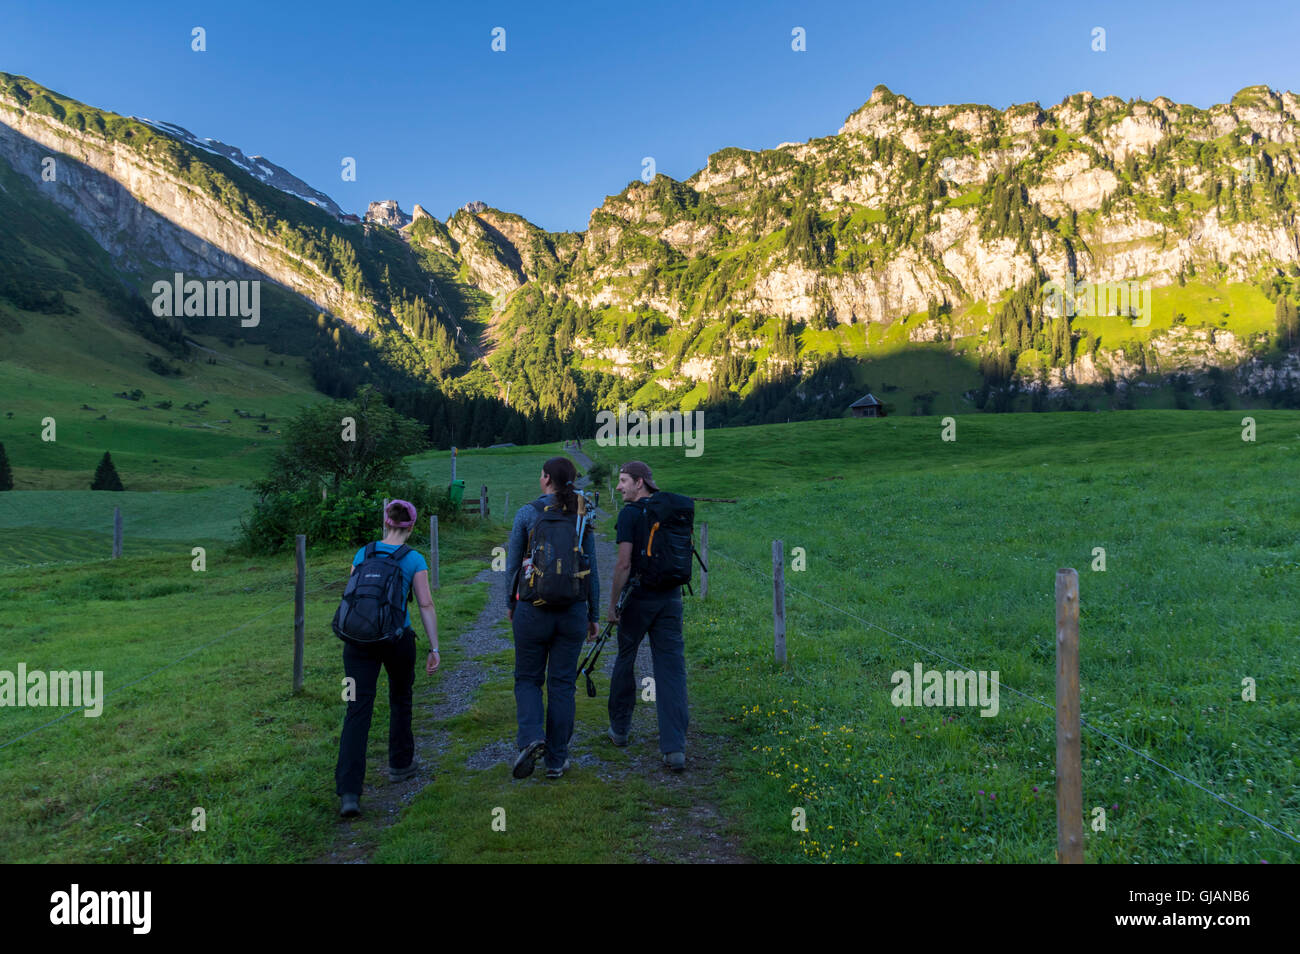 Group of three hikers in early morning, hiking in the shadow towards a sunlit mountain in the Swiss Alps. Stock Photo